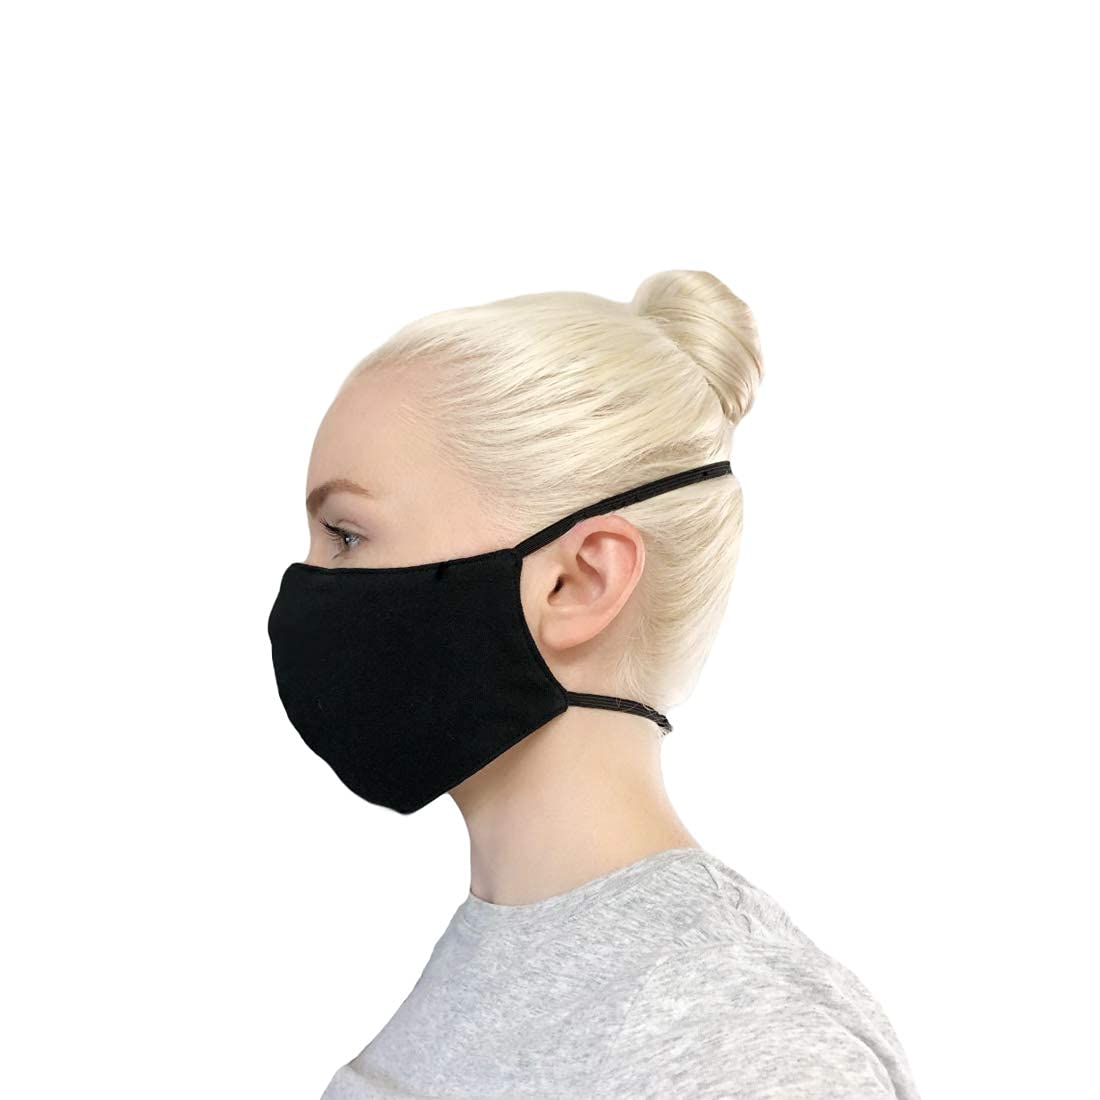 Cate & Levi - Over The Head Black Face Masks For Adults - Best For Hearing  Aids - 100% Organic Cotton - Made In Canada - Reusable, Soft and  Breathable, Secures Around Head and Neck